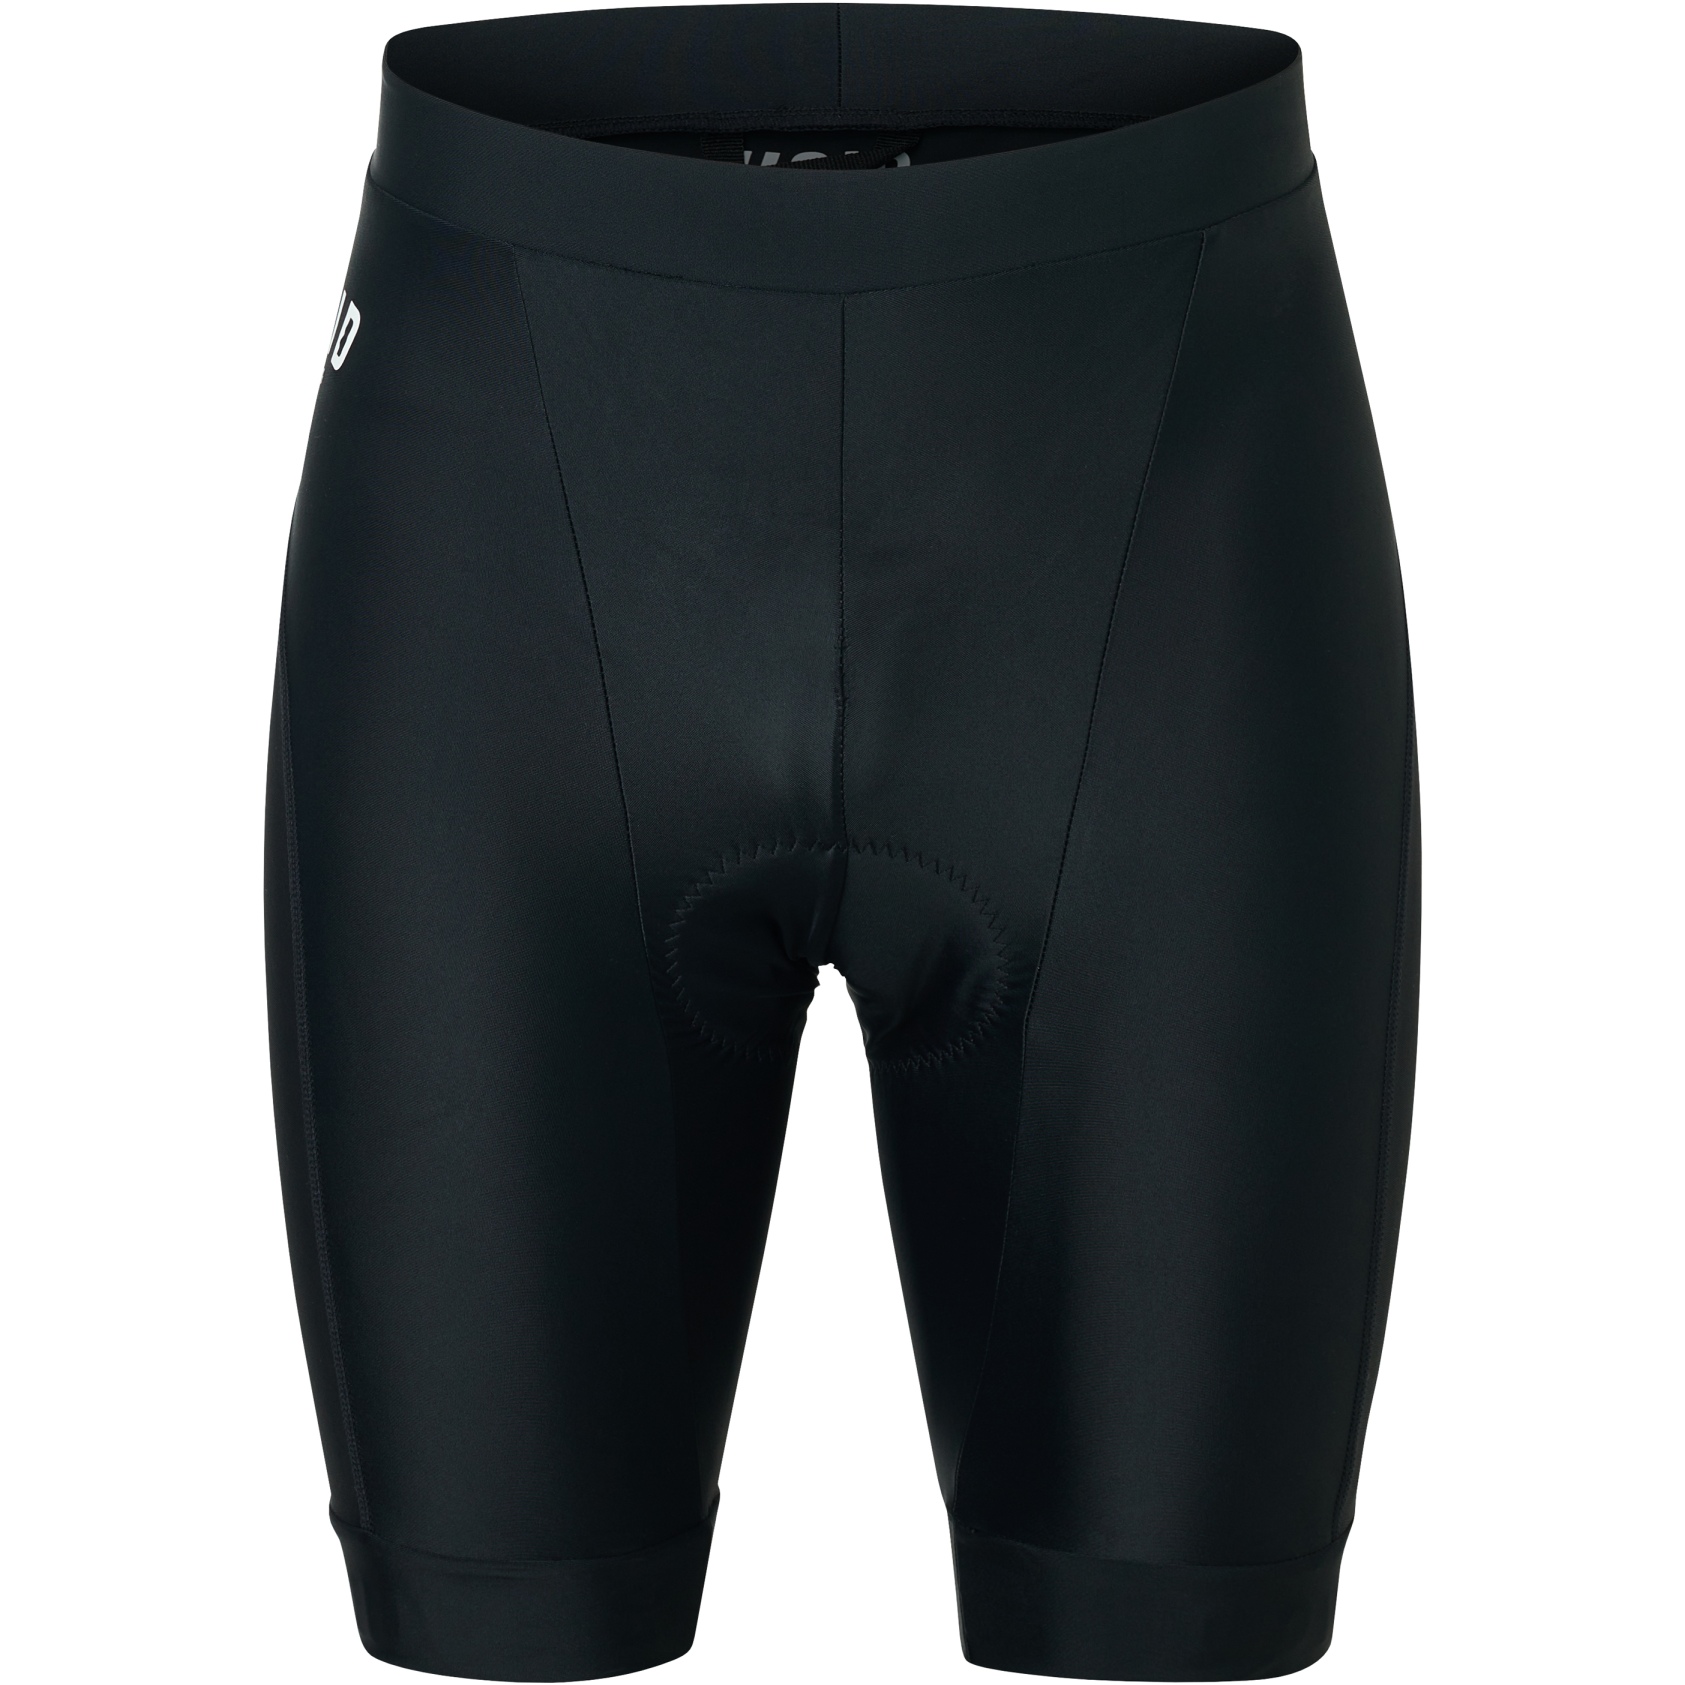 Productfoto van VOID Cycling Core Cycle Shorts - Black